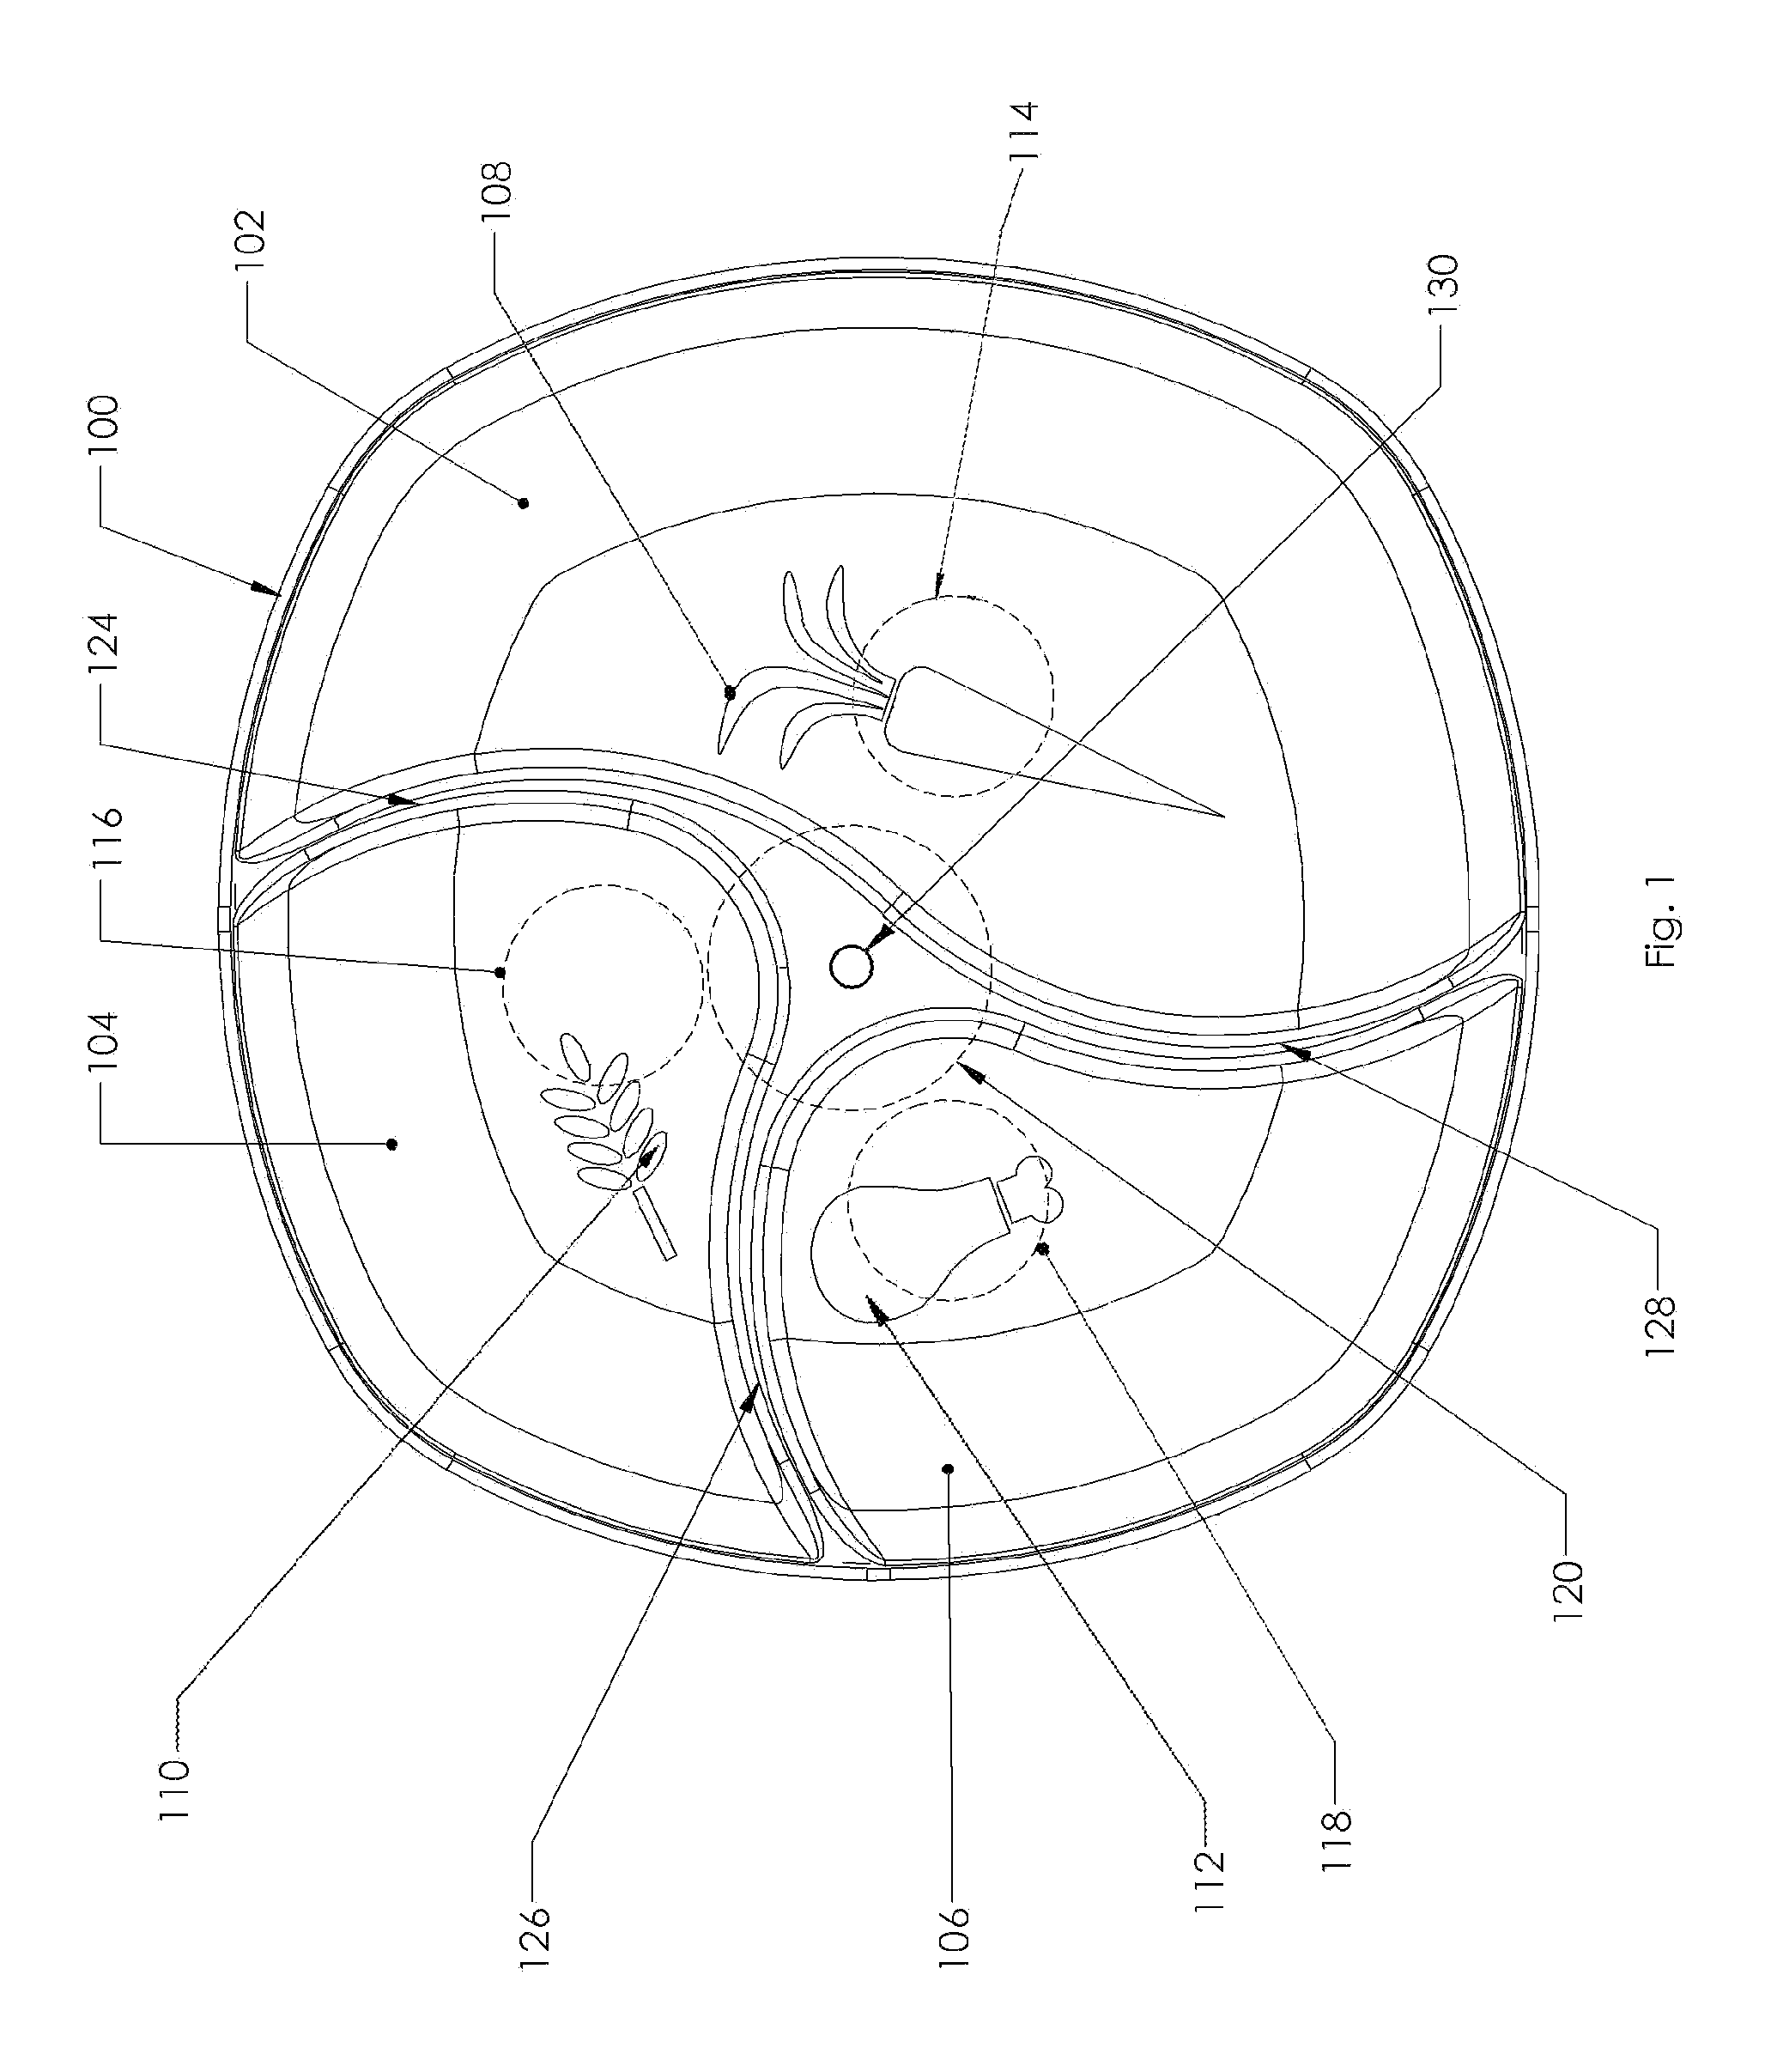 Apparatus and method for identifying, measuring and analyzing food nutritional values and consumer eating behaviors